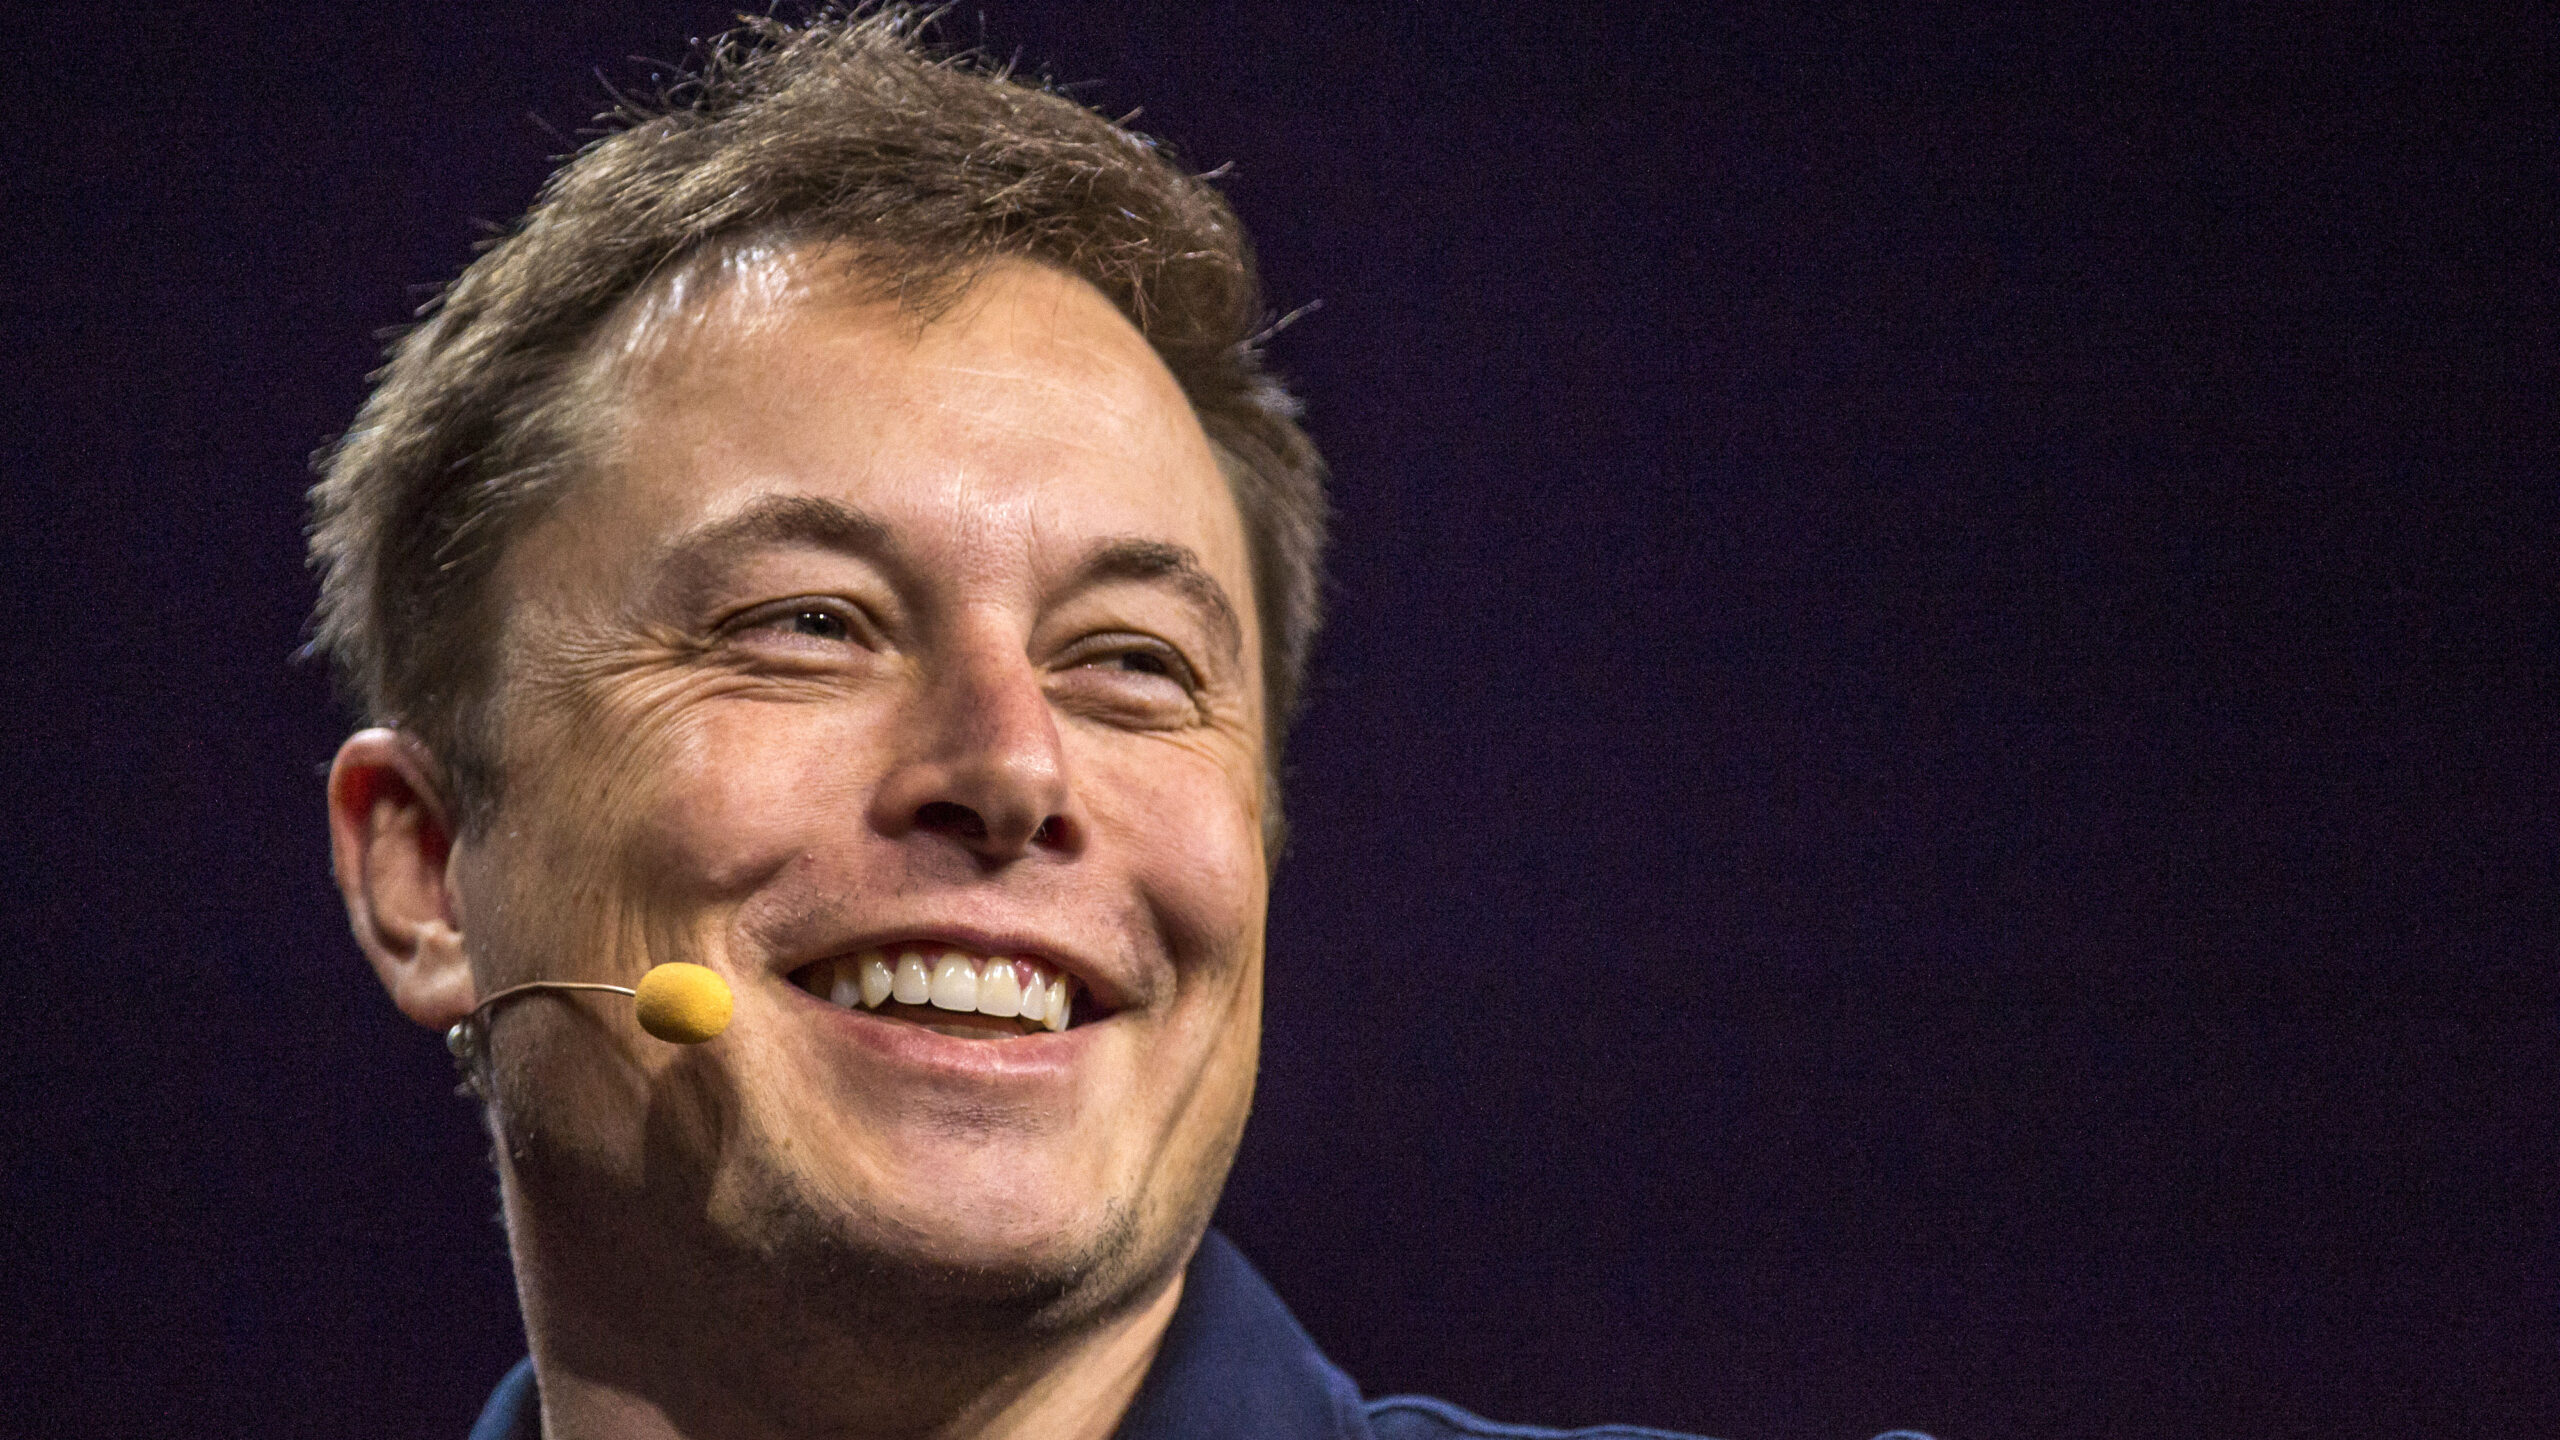 Elon Musk Criticizes Politician's Comments on Gender Identity: 'Every Young Person Experiences Uncertainty About Who They Are'